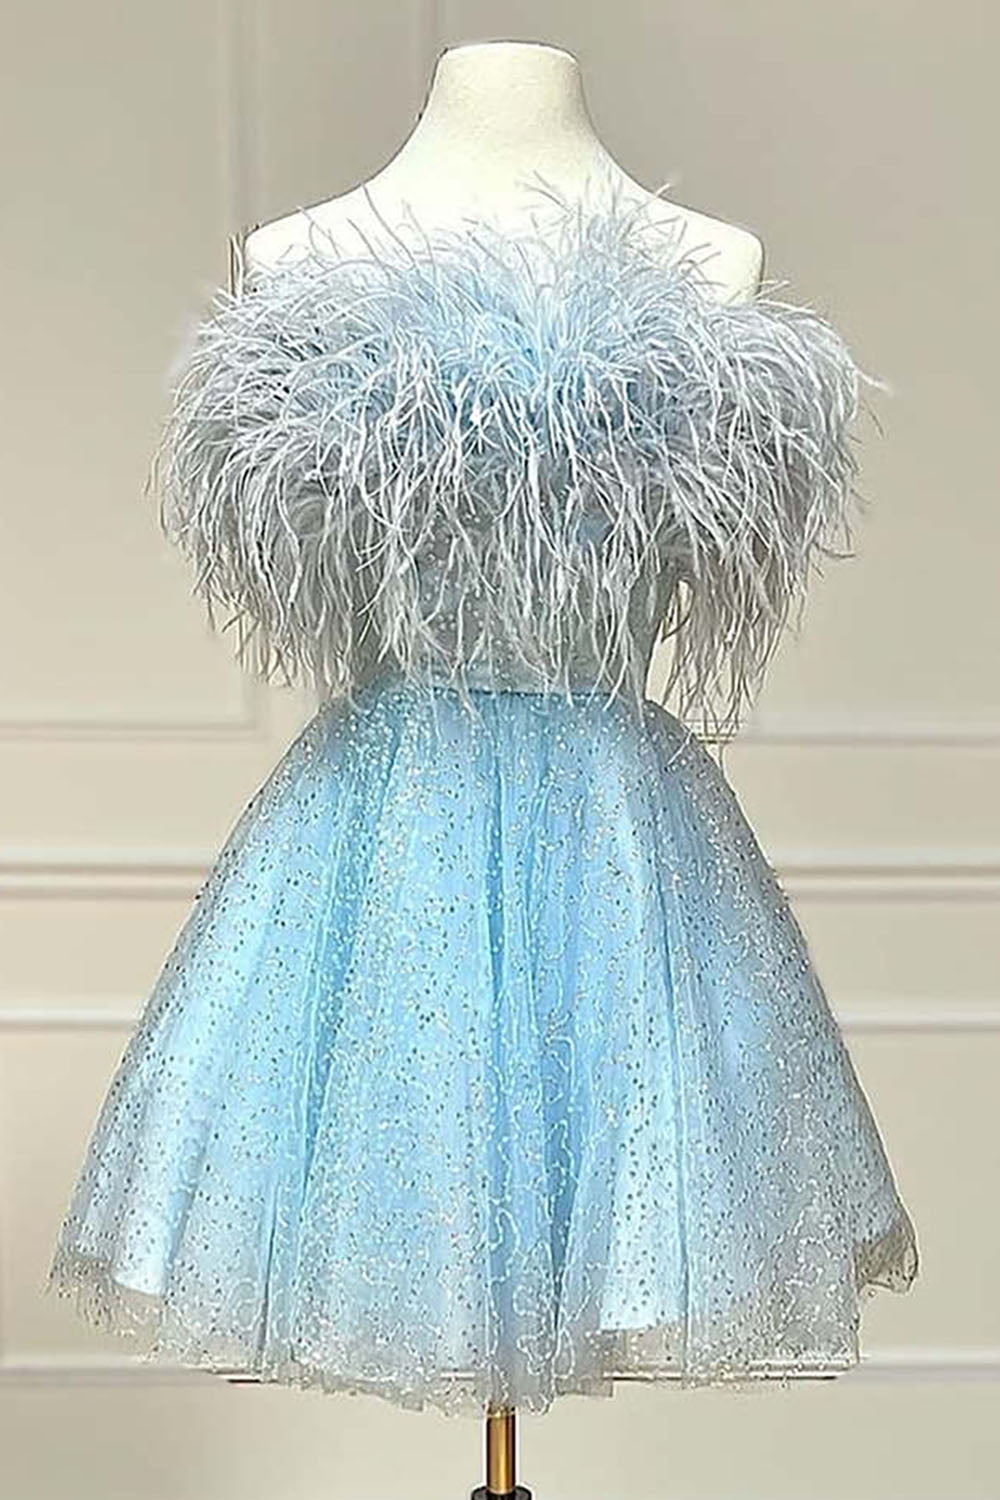 Light Blue A-Line Strapless Corset Homecoming Dress with Feathers outfit, Homecoming Dresses Blue